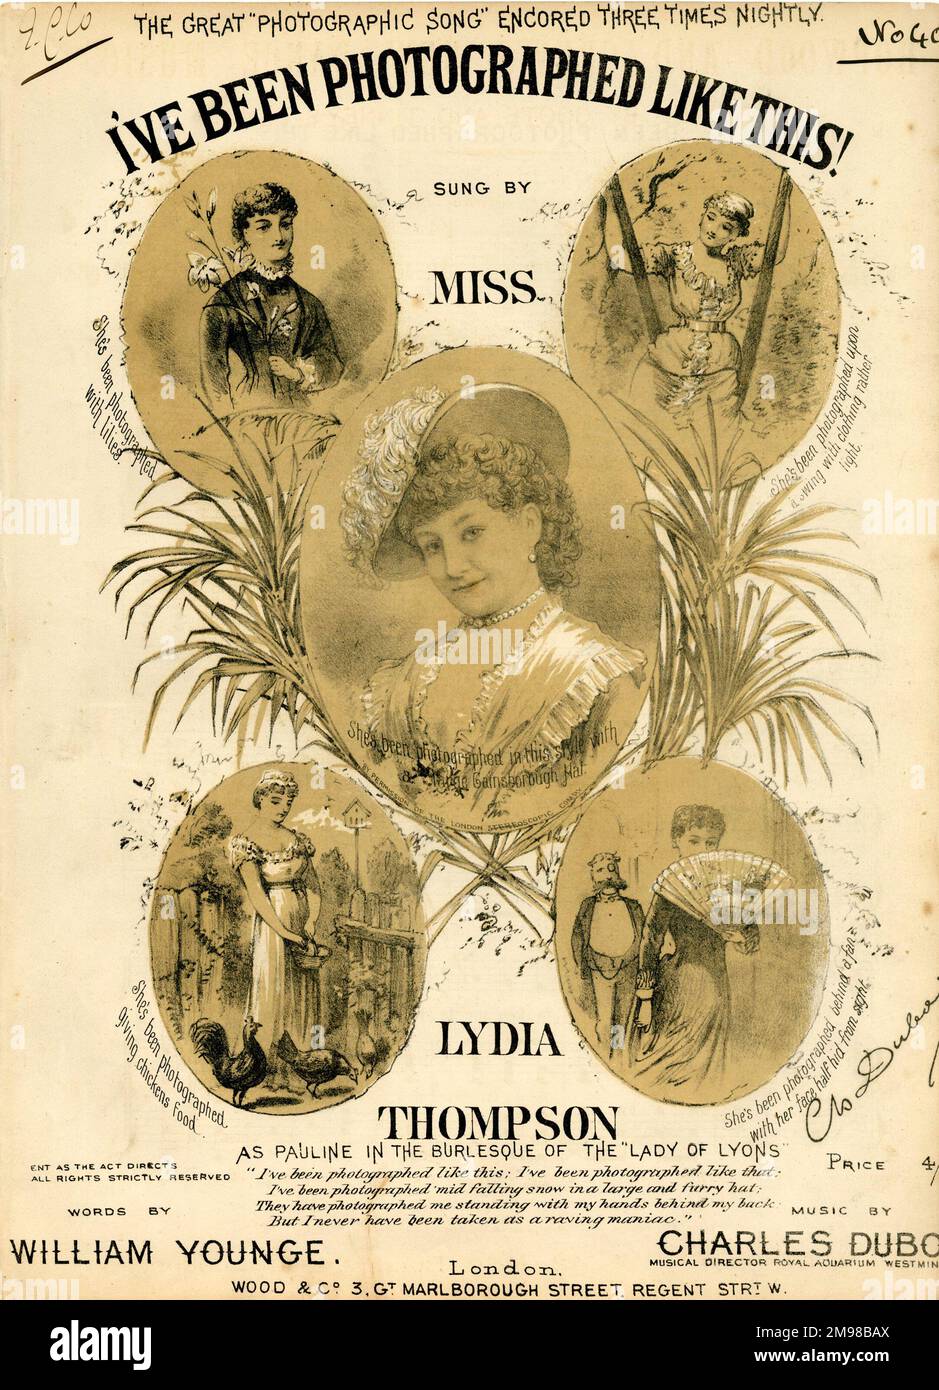 Music cover, I've Been Photographed Like This! Sung by Lydia Thompson as Pauline in the burlesque of the Lady of Lyons. Words by William Younge, music by Charles Dubois. The song was a satire on the craze for artistic photography in various poses. Stock Photo